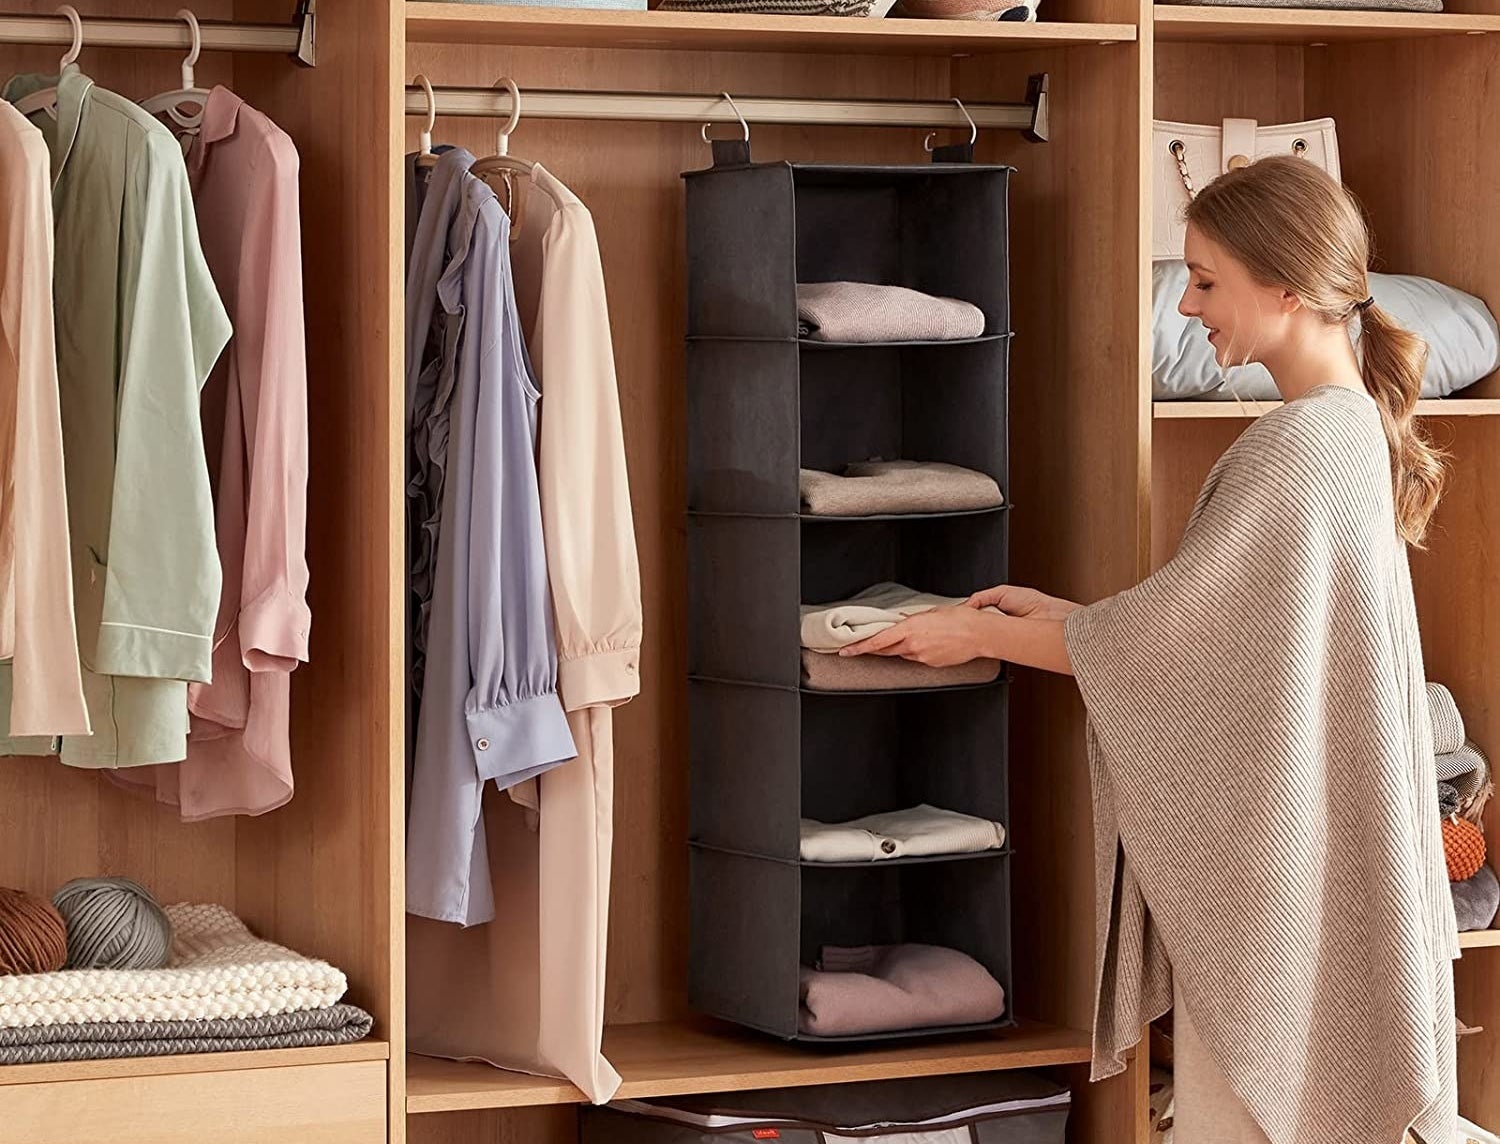 model putting folded clothes on one of the shelves of the organizer